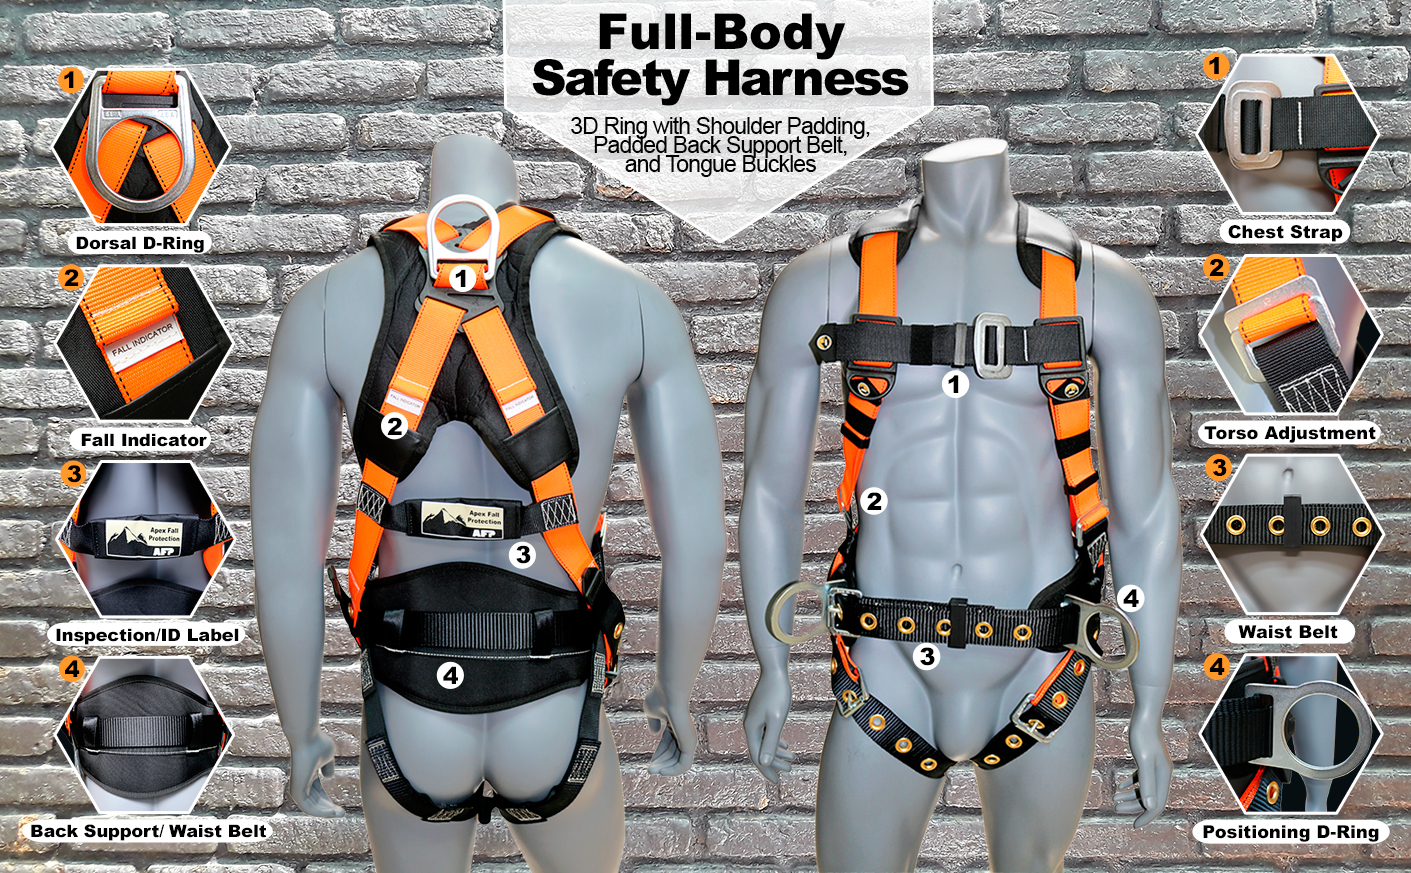 AFP Full-Body Safety Harness 3D Ring With Shoulder Padding, Padded Back Support Belt, And Tongue Buckles (OSHA/ANSI Compliant)